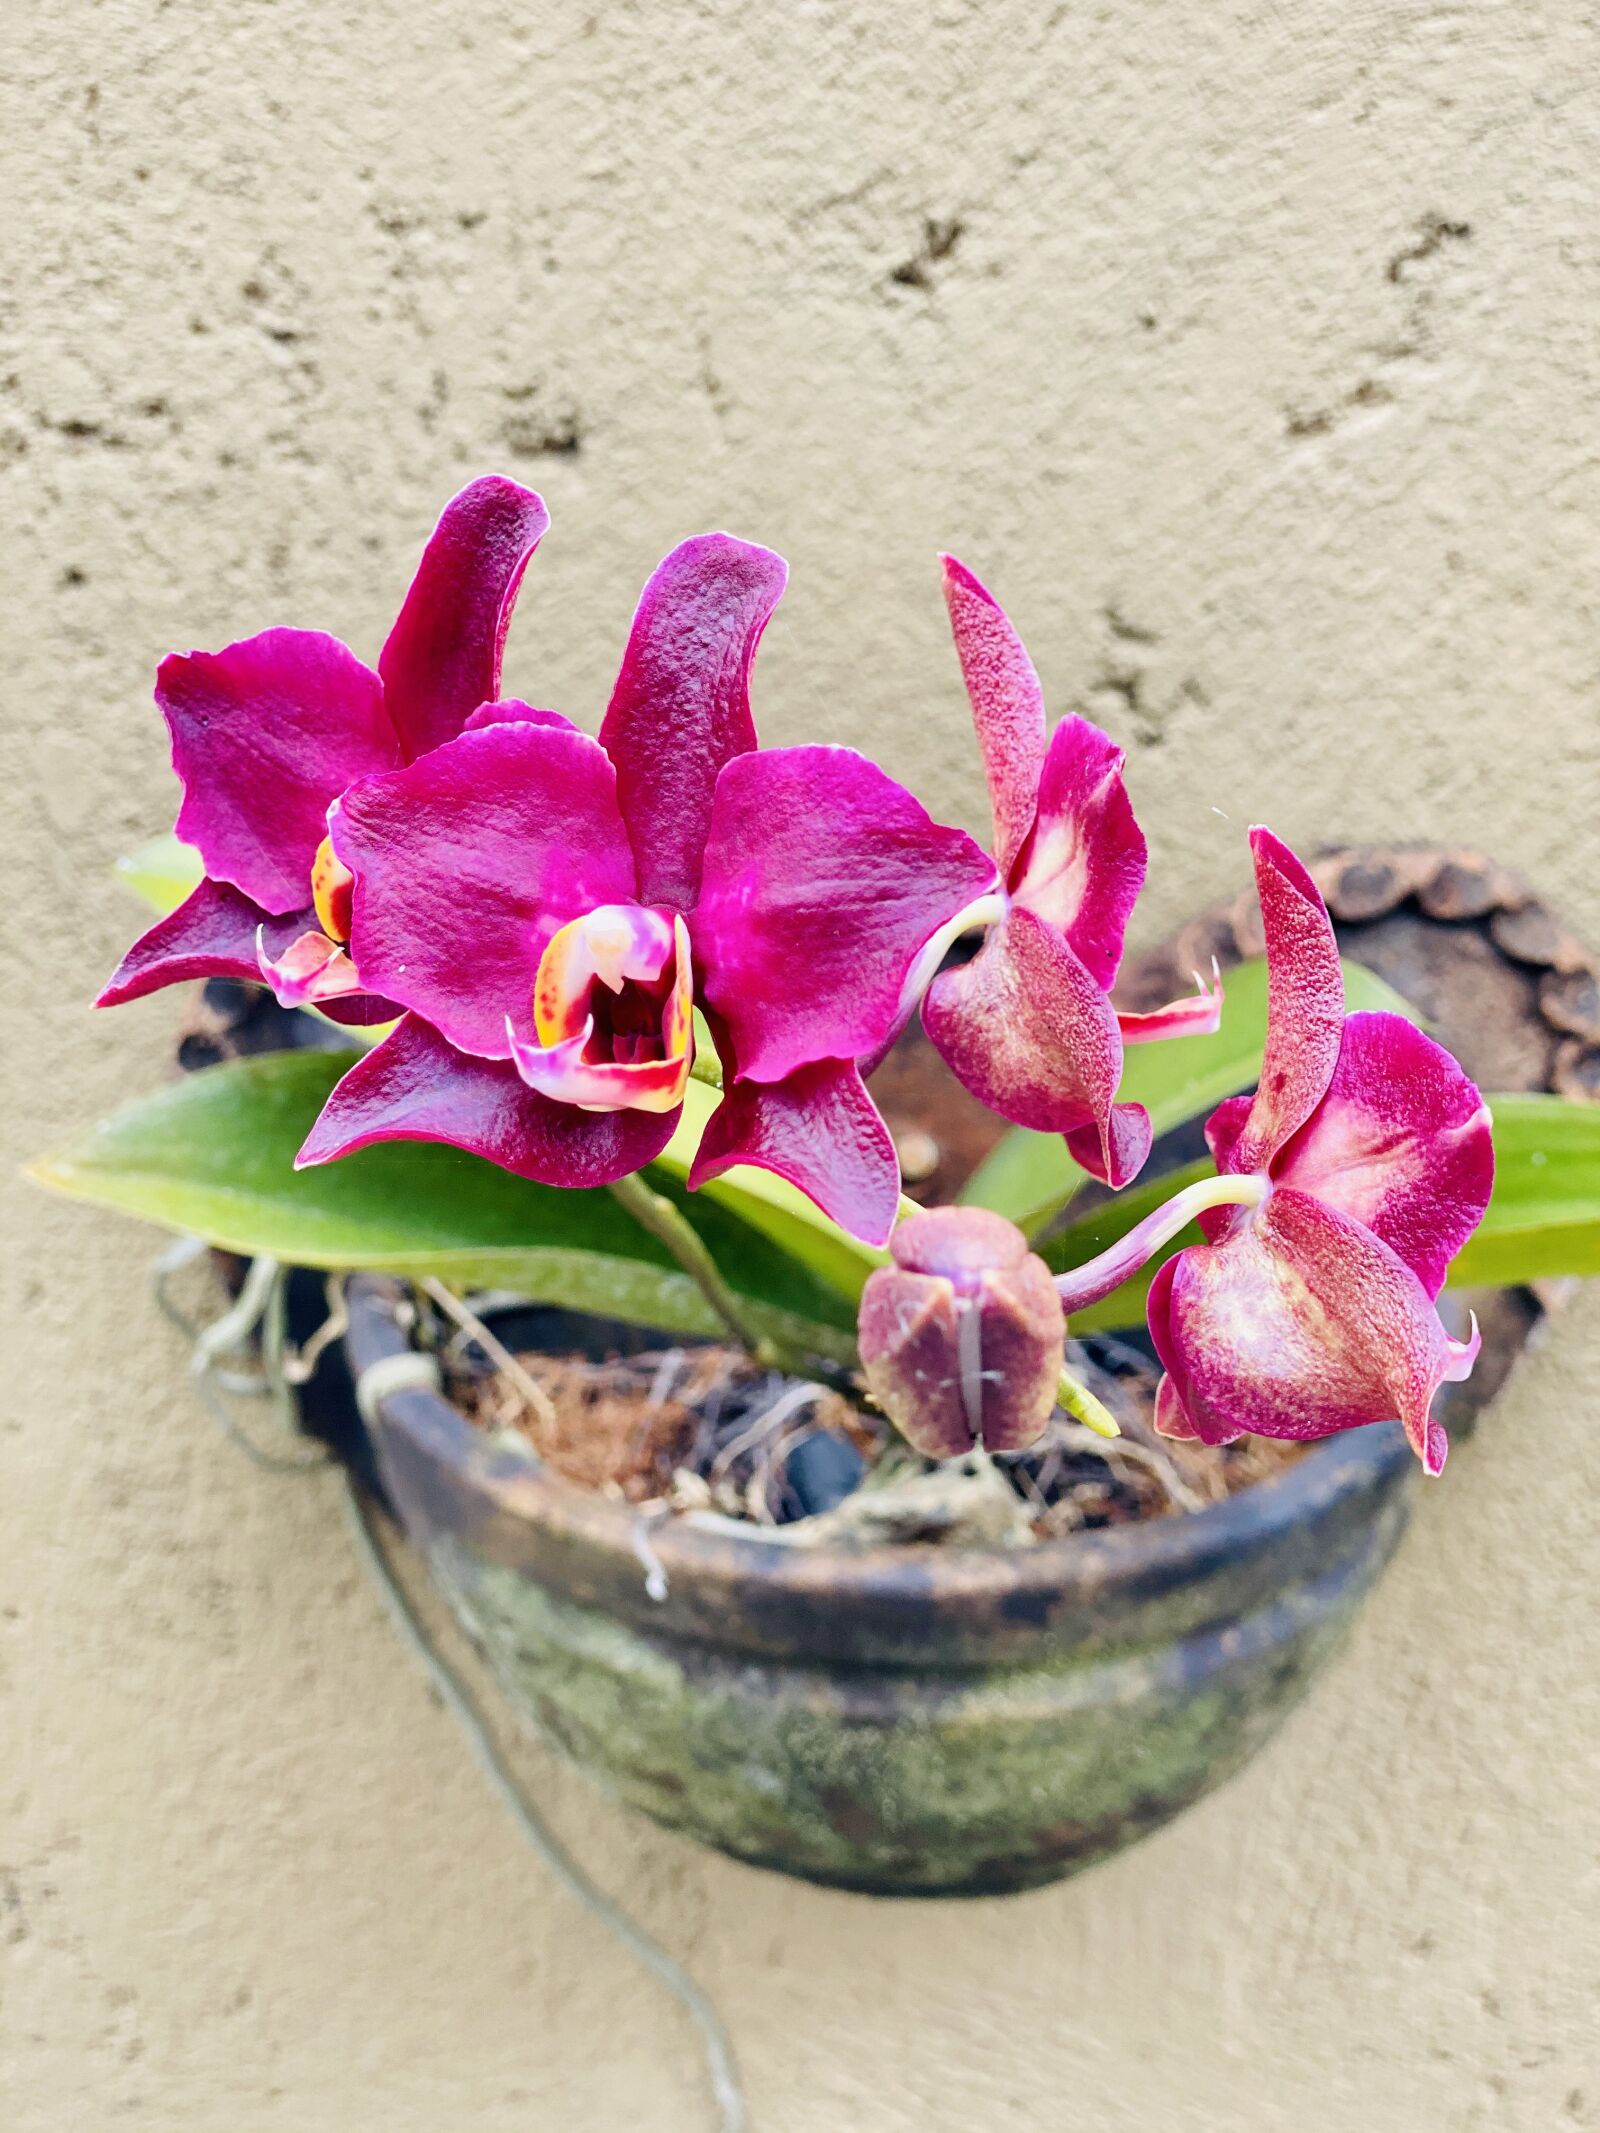 iPhone 11 Pro back dual camera 6mm f/2 sample photo. Orchid, bloom, blossom photography